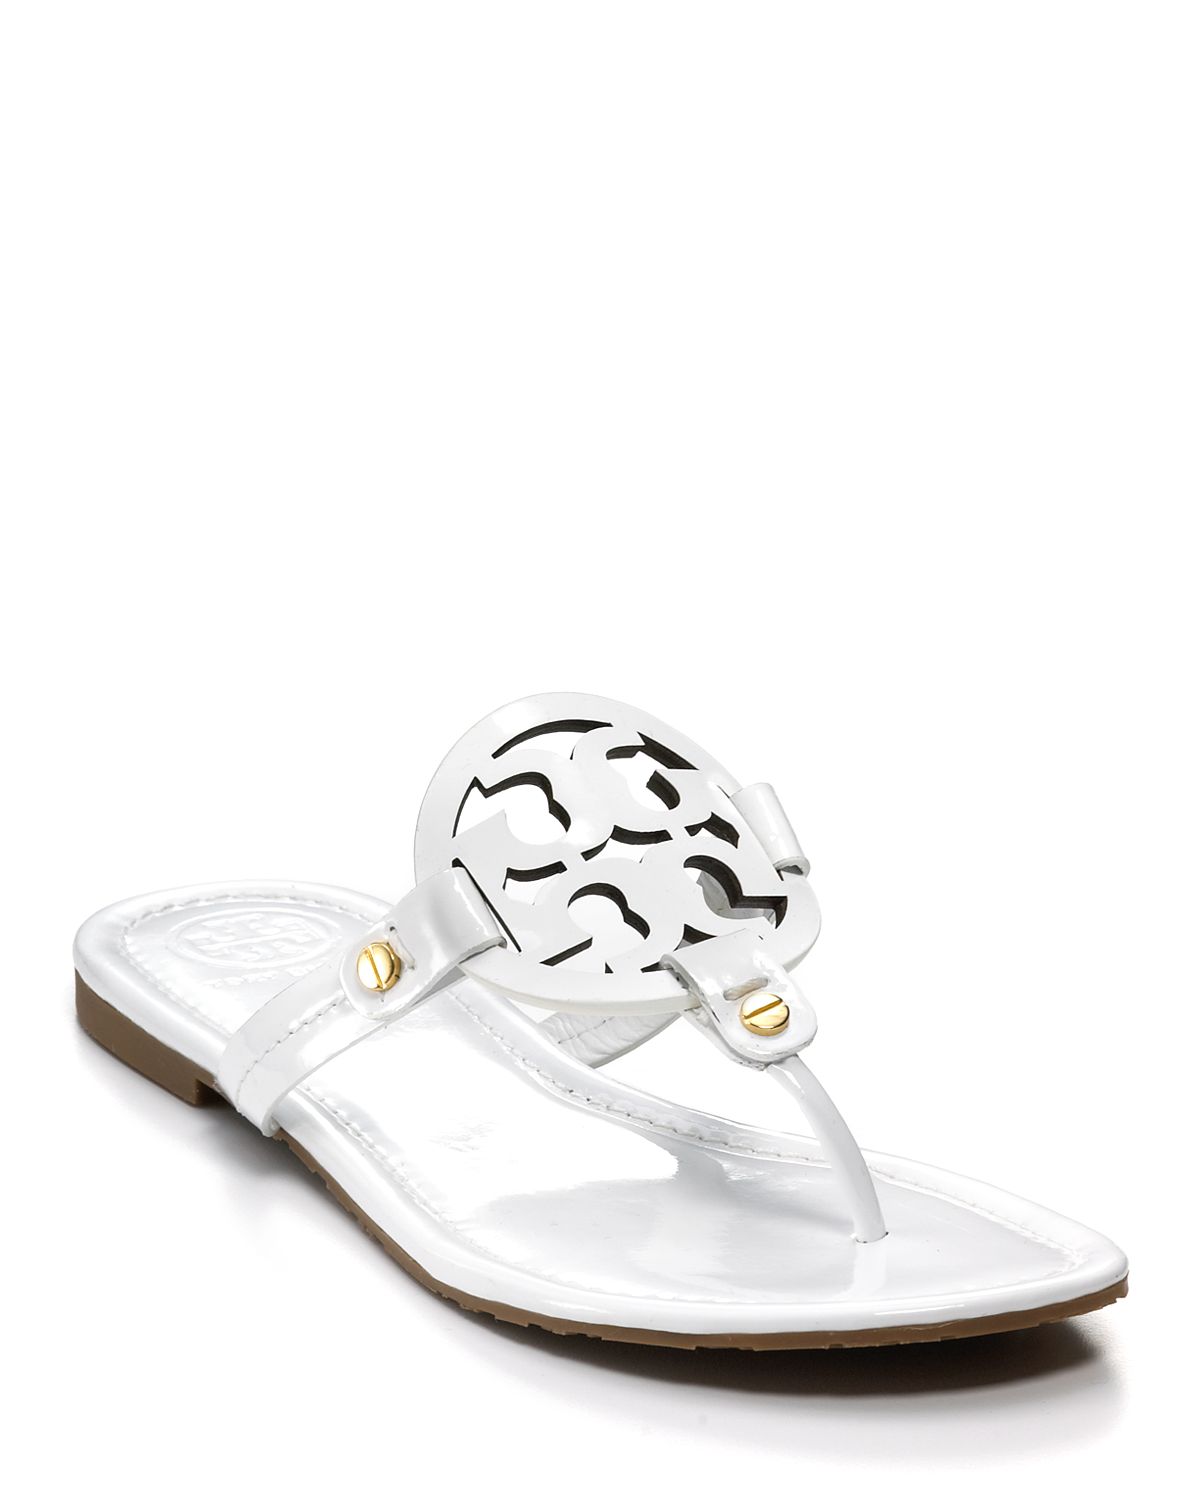 Tory Burch Sandals - Miller Thong in White | Lyst